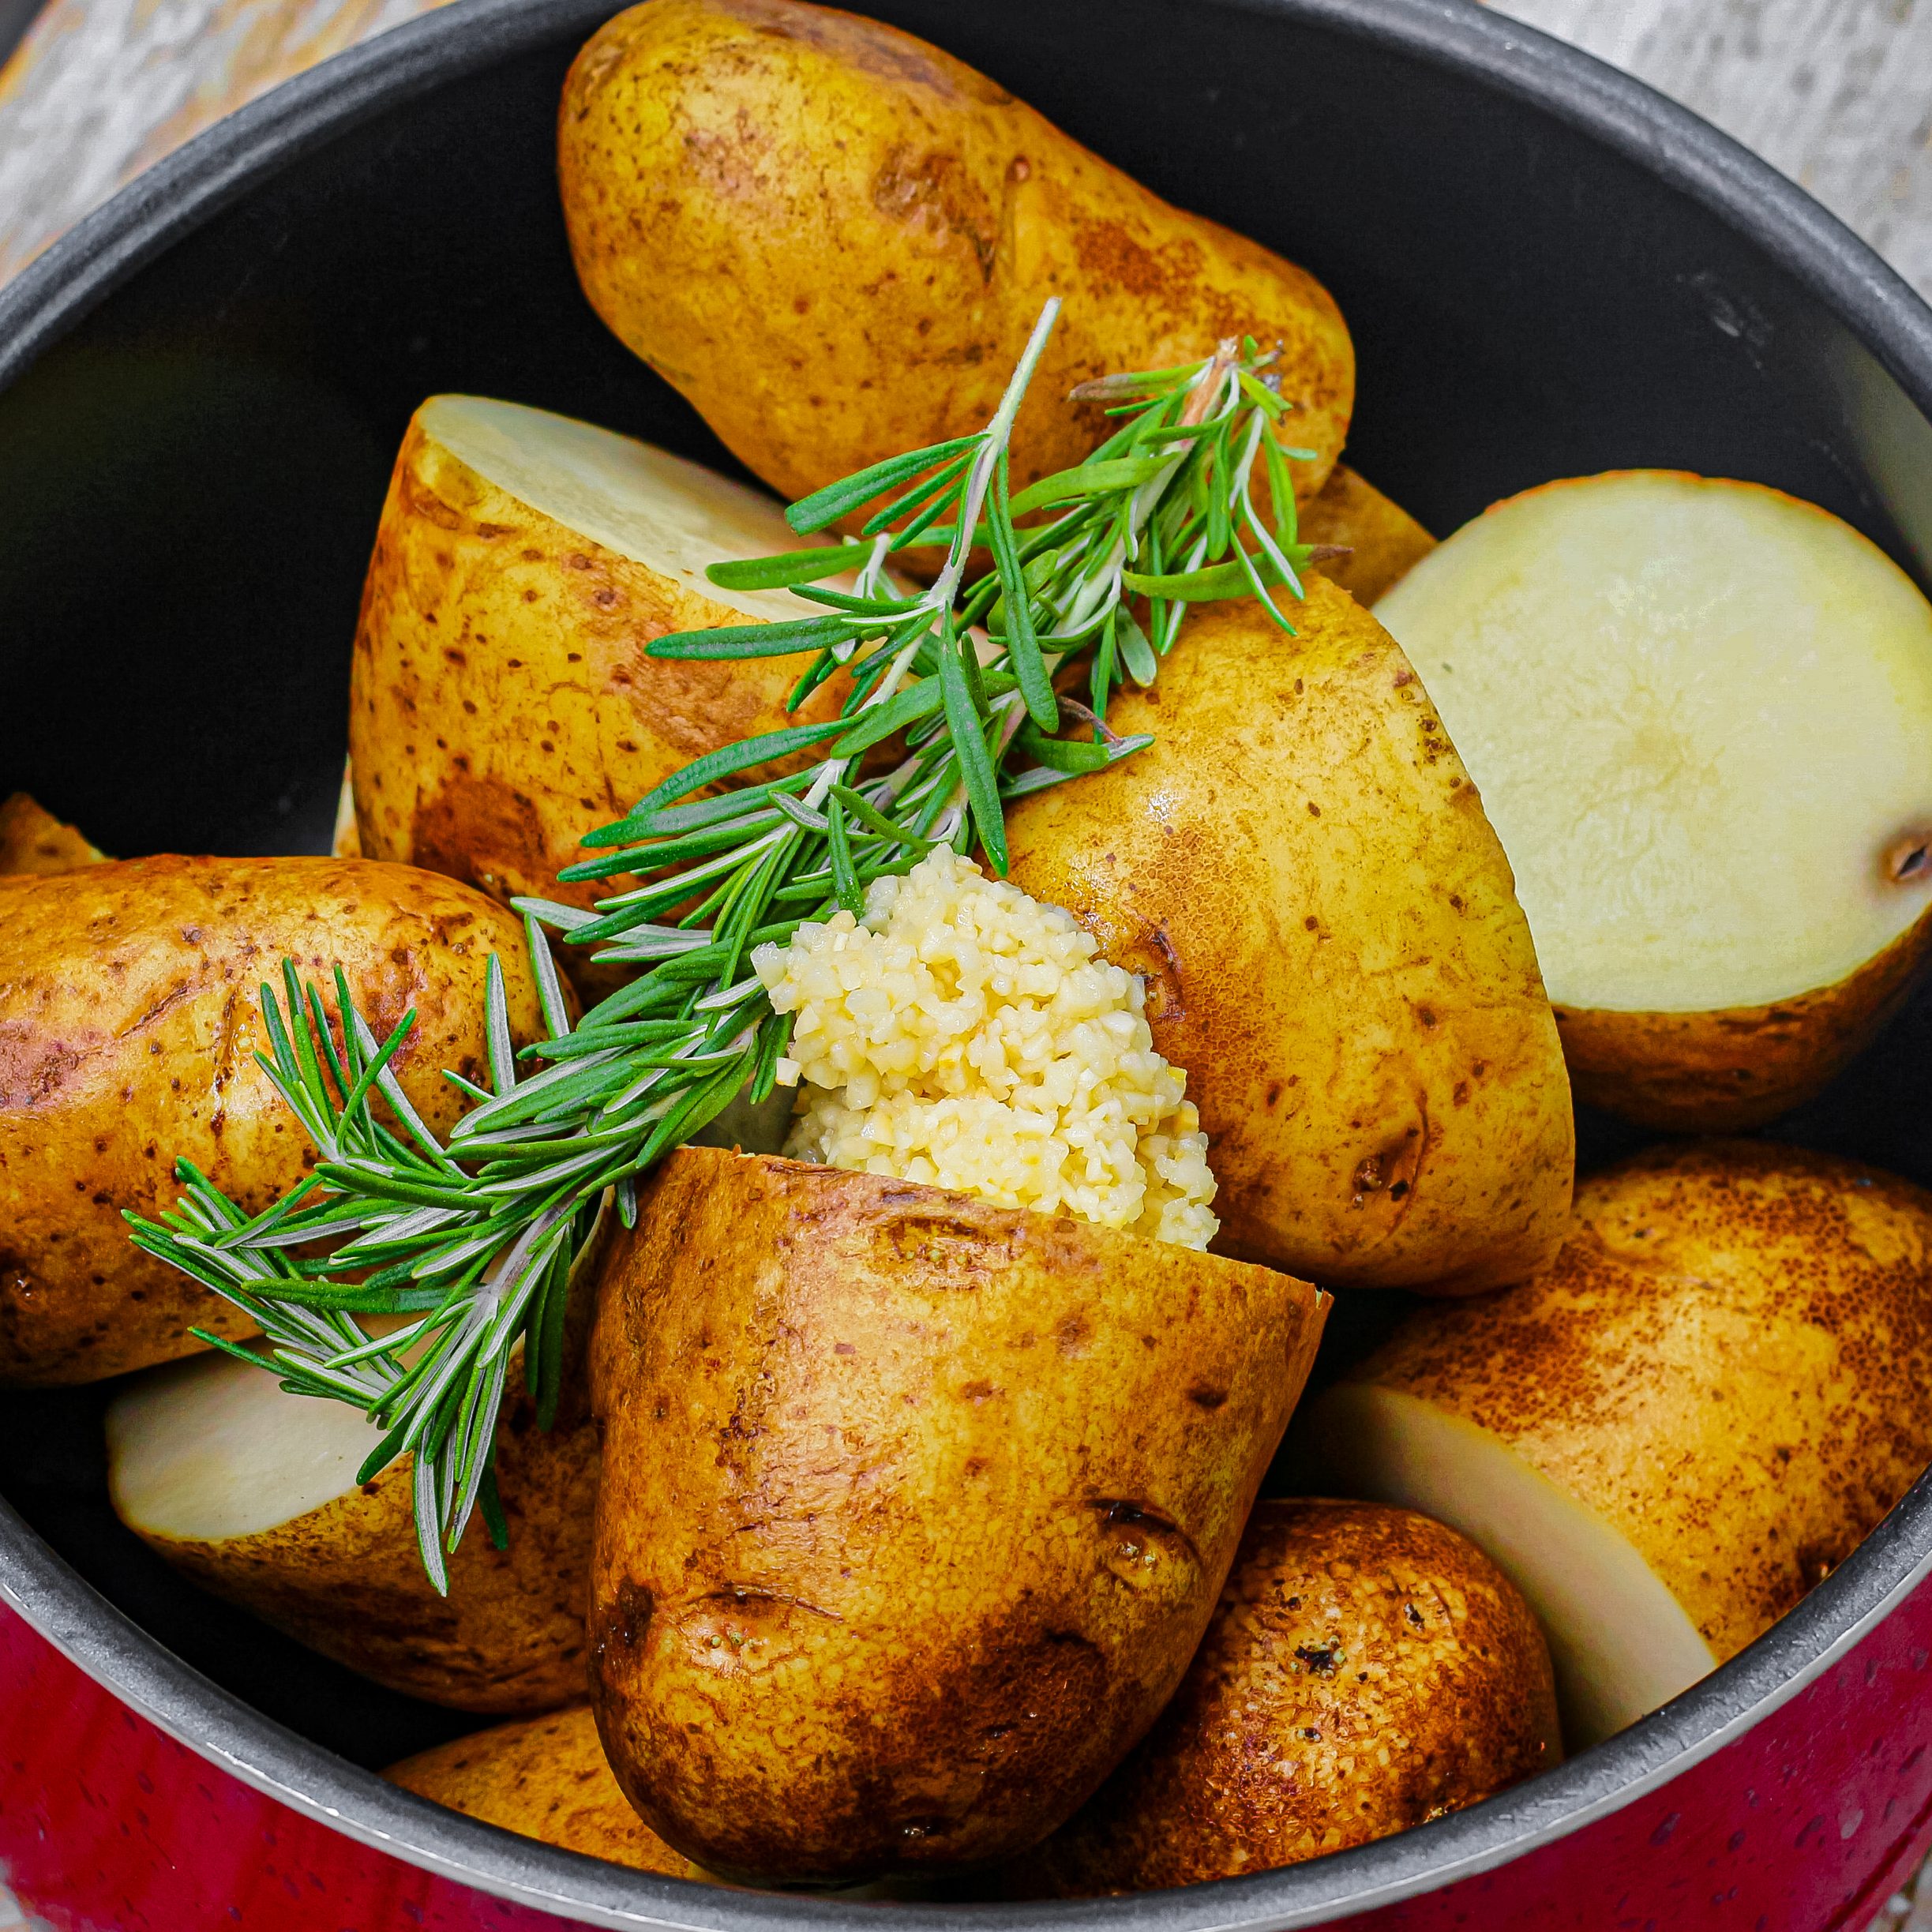 In a large stockpot add your potatoes, and enough water to submerge the potatoes.